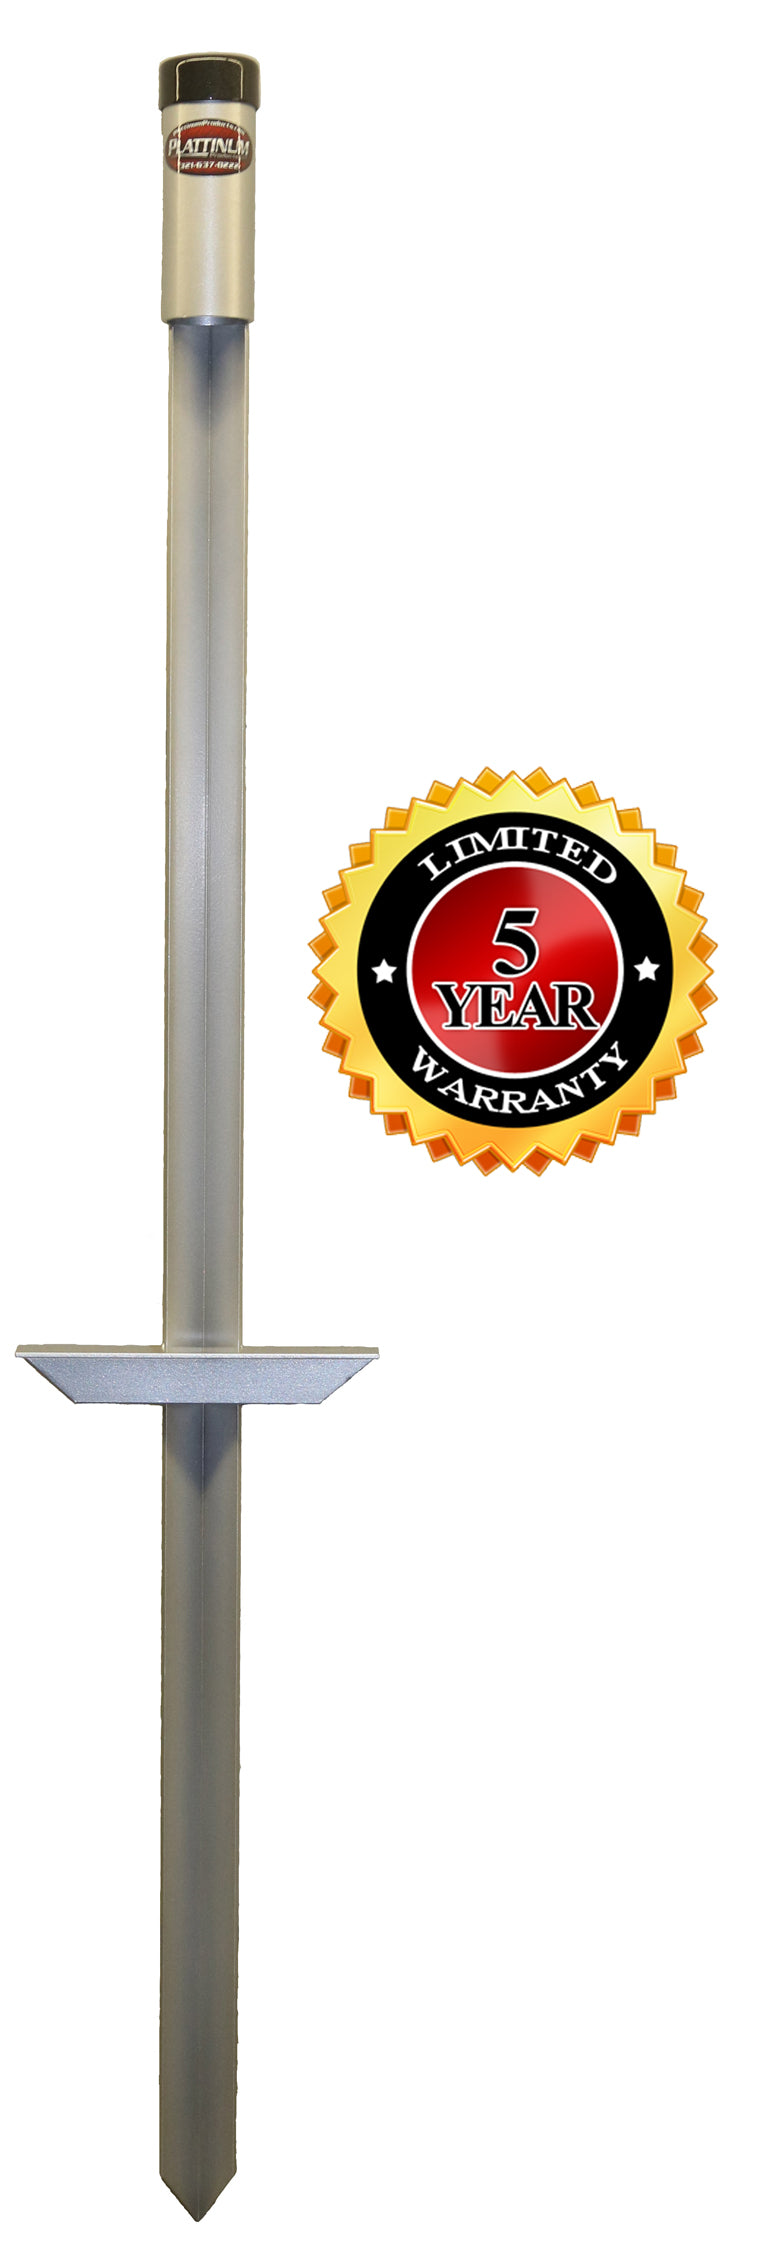 Adjustable Sand Spike Rod Holder-Great for surf, Bank, Beach Fishing, from  24 Expand to 44